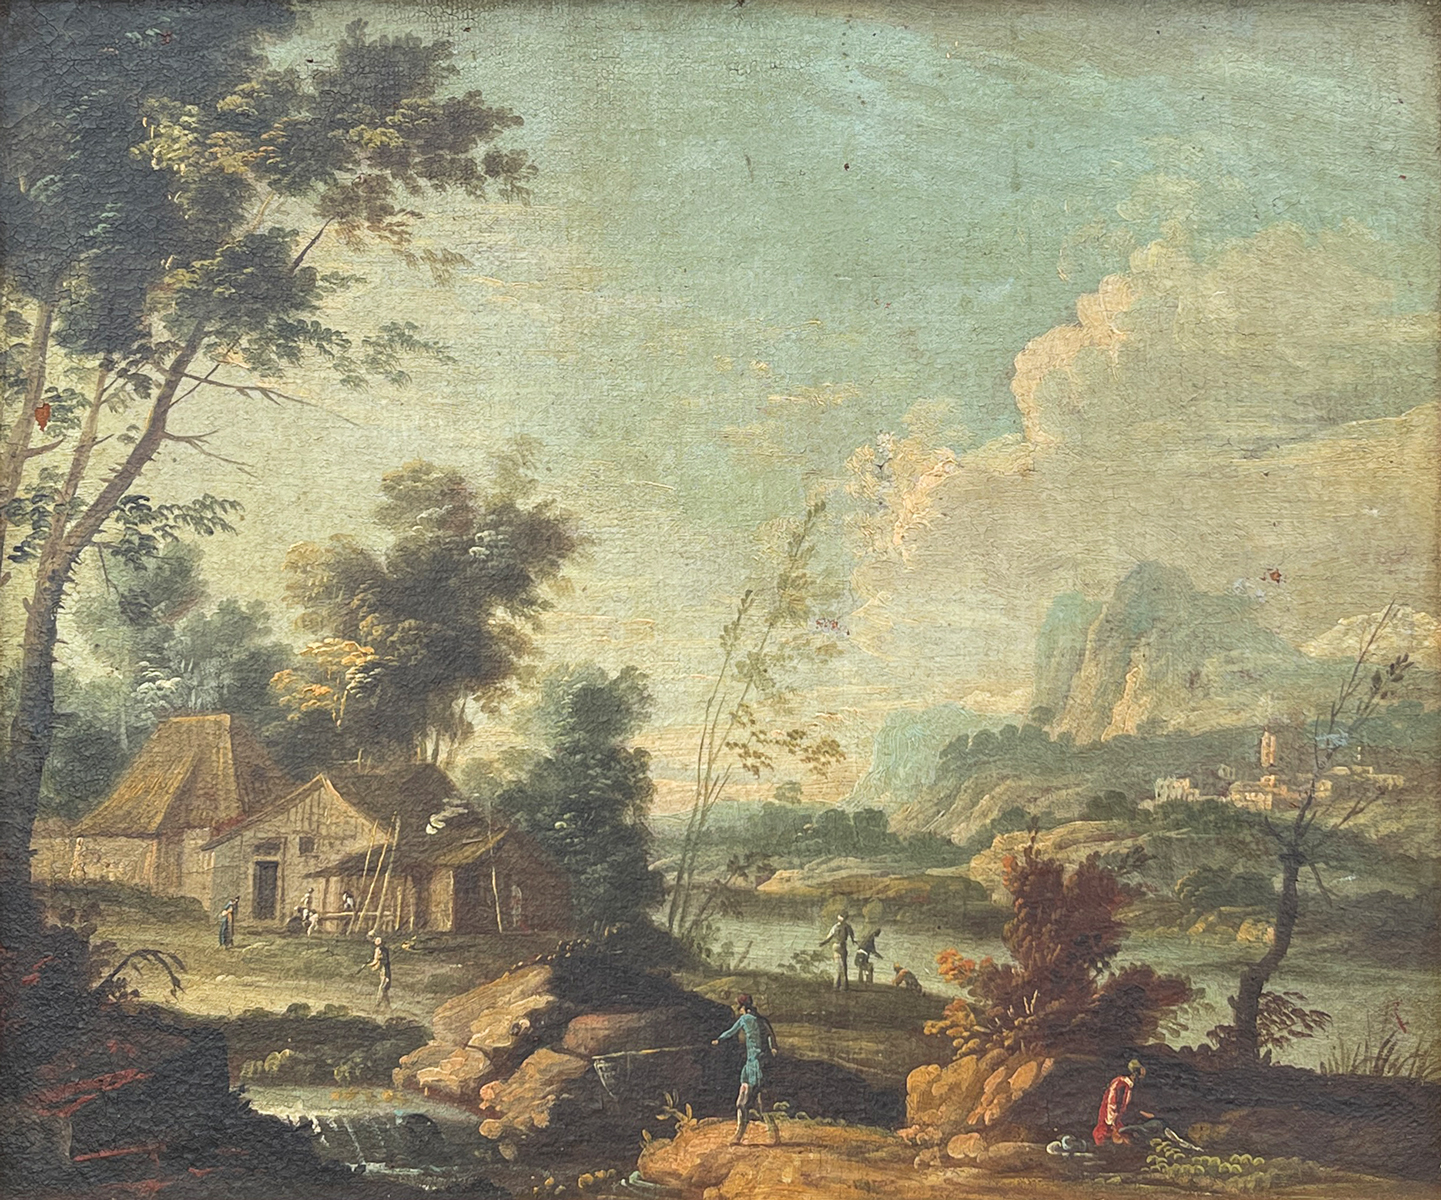 OLD MASTER STYLE LANDSCAPE PAINTING: